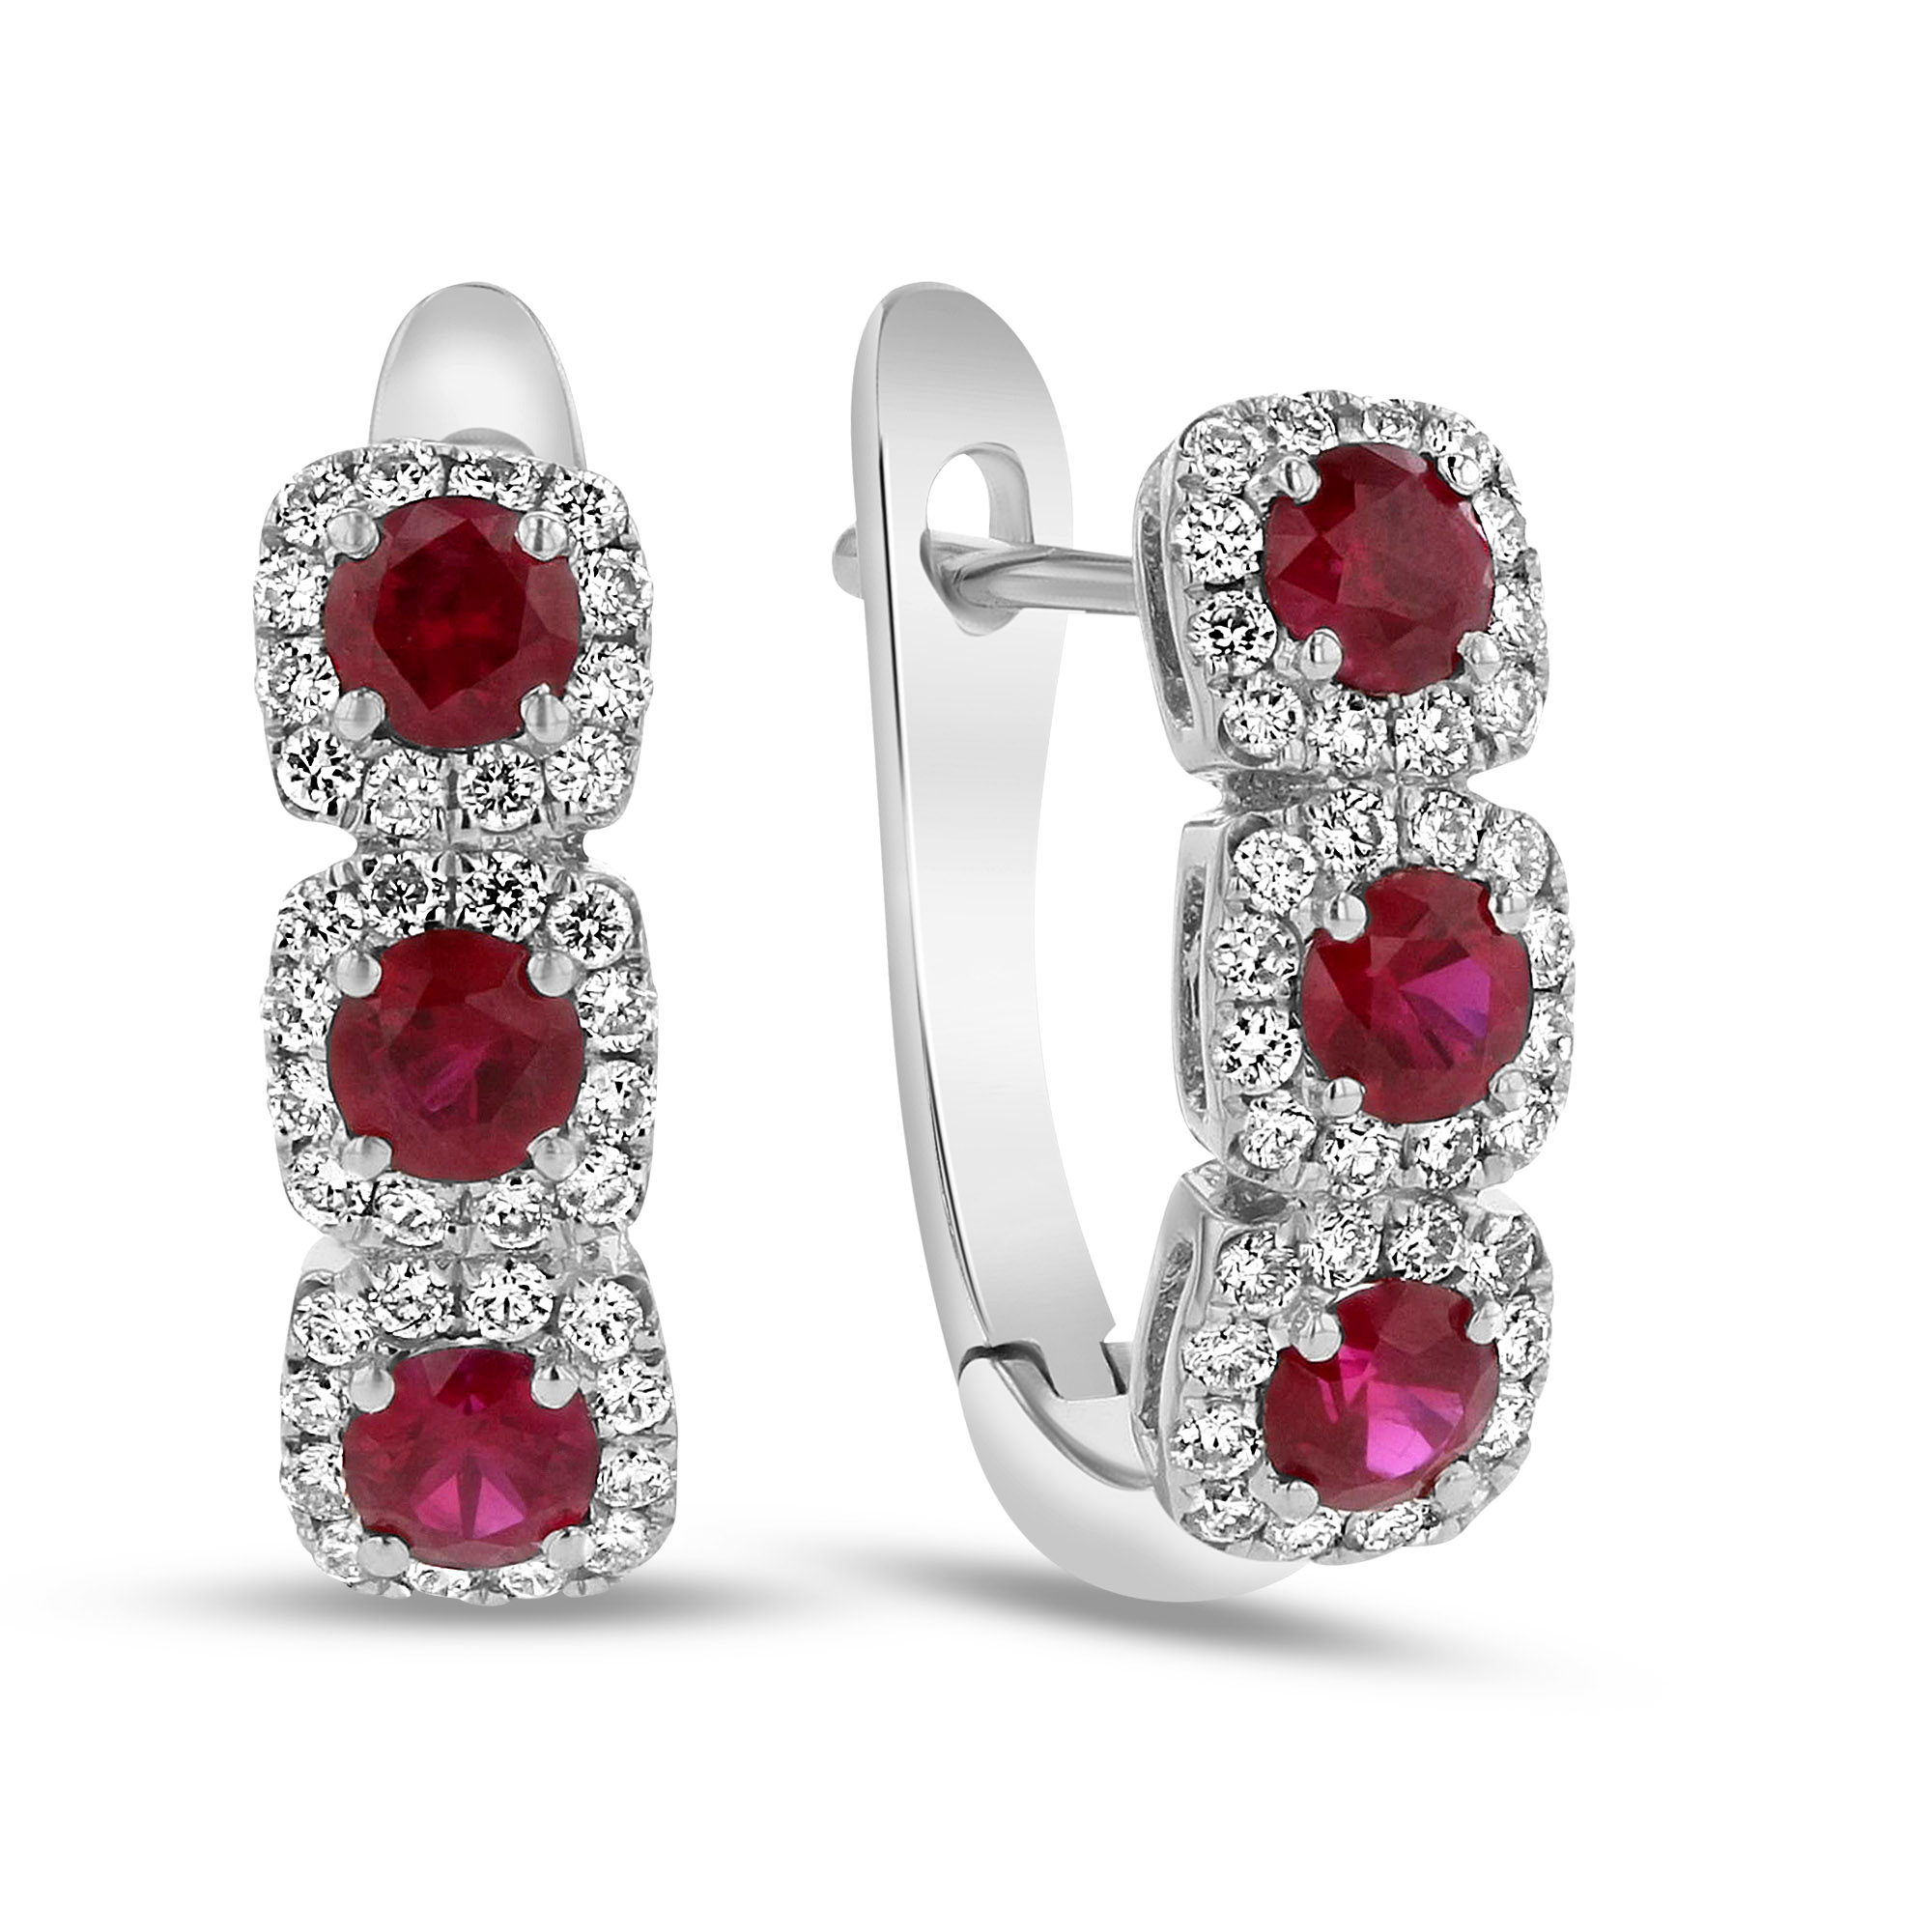 View 0.82ctw Diamond and Ruby Hoop Earrings in 18k White Gold